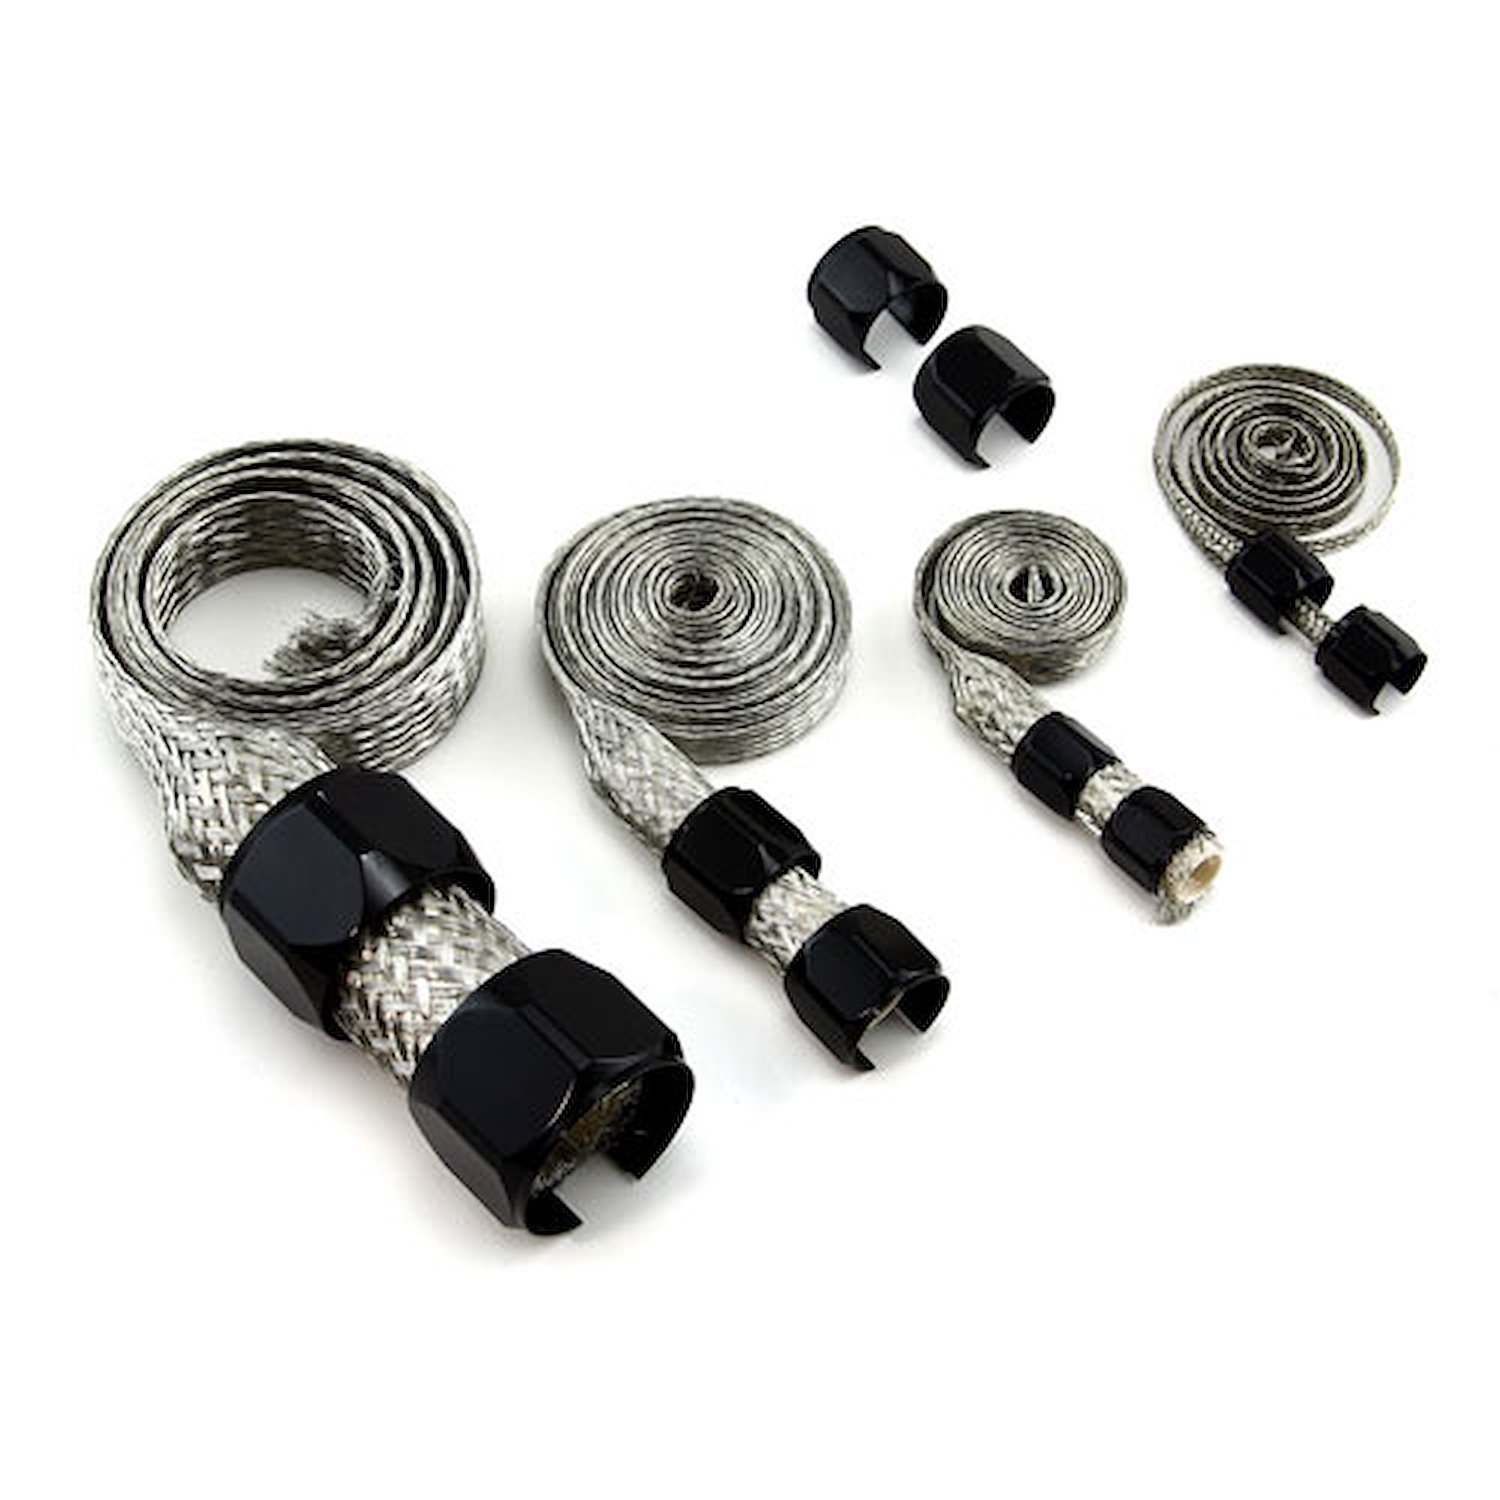 Universal Stainless Steel Braide Hose and End Sleeve Kit - Black